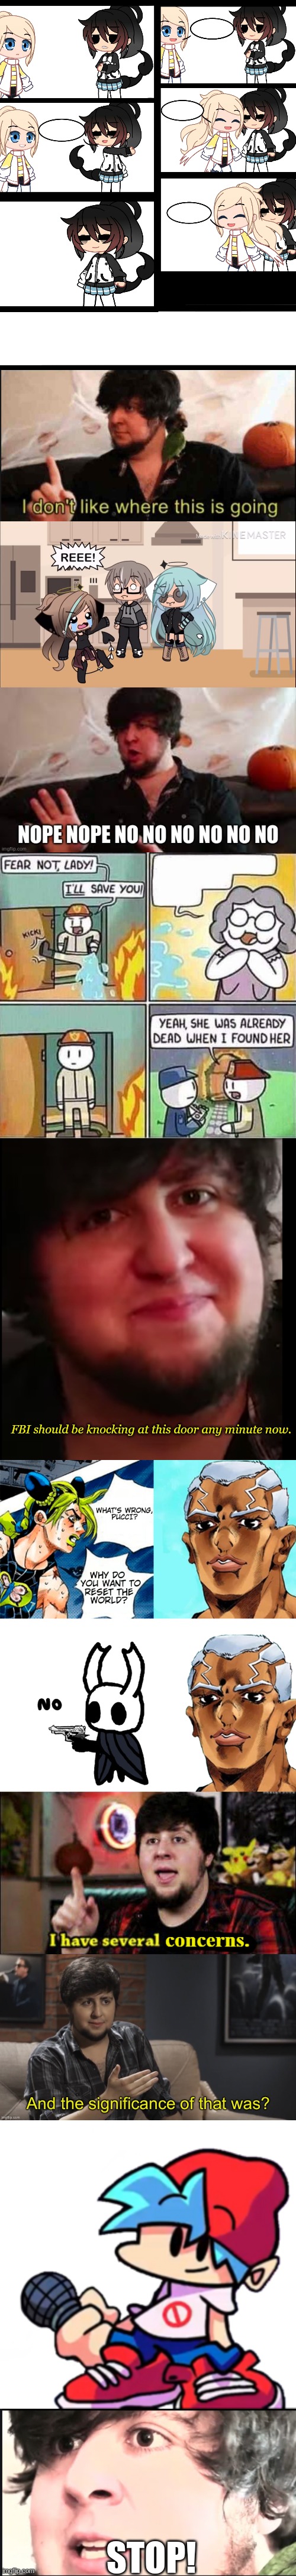 Jontron views unfunny memes(FANMADE) | FBI should be knocking at this door any minute now. STOP! | image tagged in make this a meme lol,jontron i don't like where this is going,reeeee,jontron nope nope no,i have several concerns,jontronmemes | made w/ Imgflip meme maker